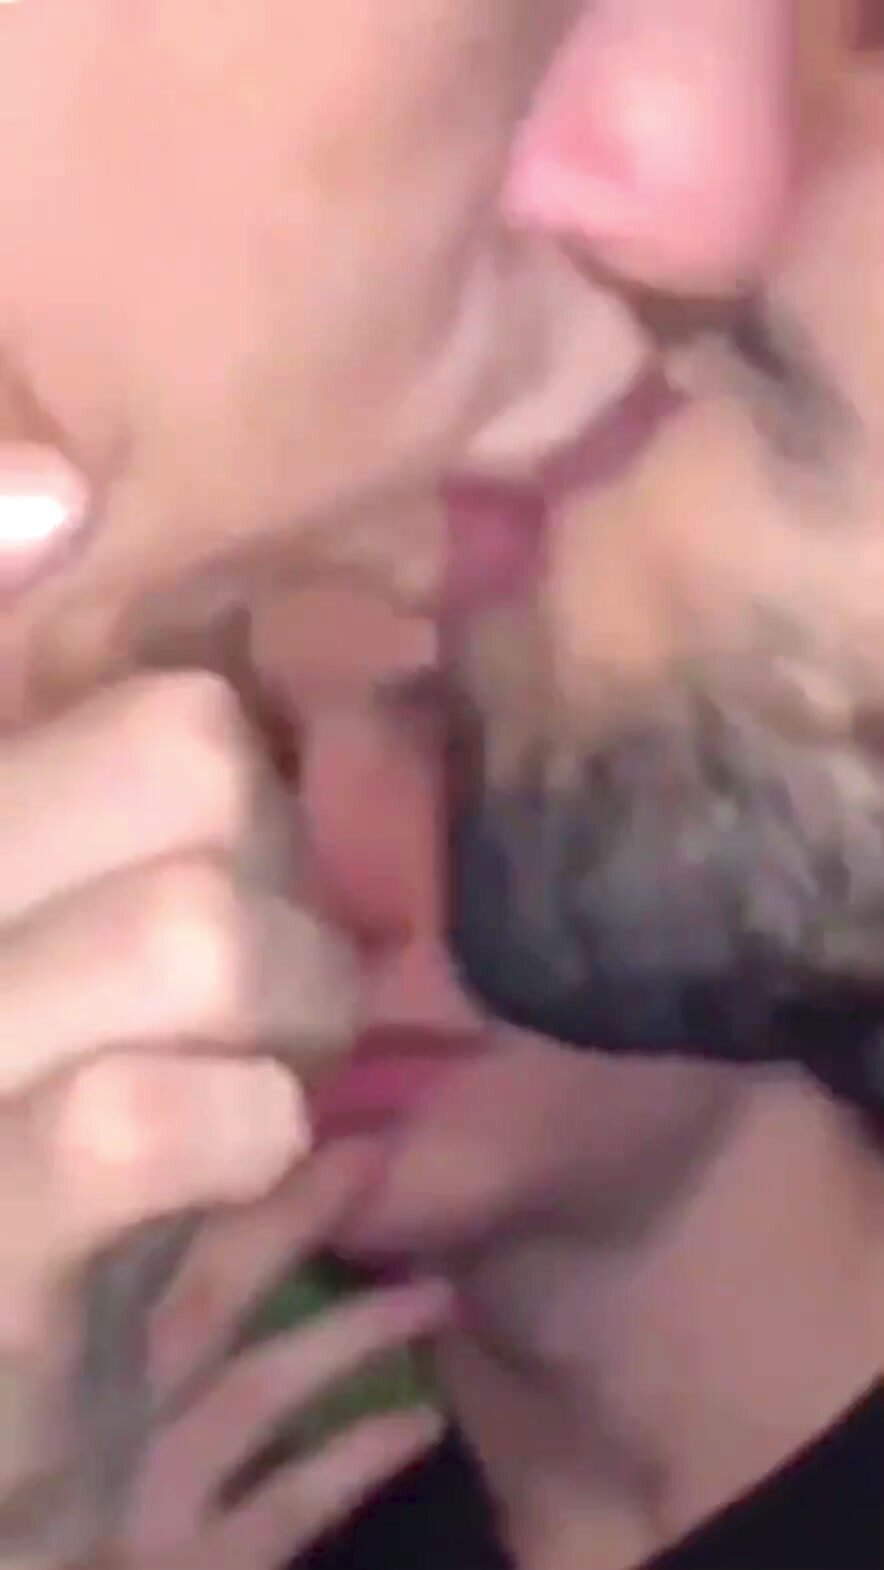 french straight guys tongue kissing